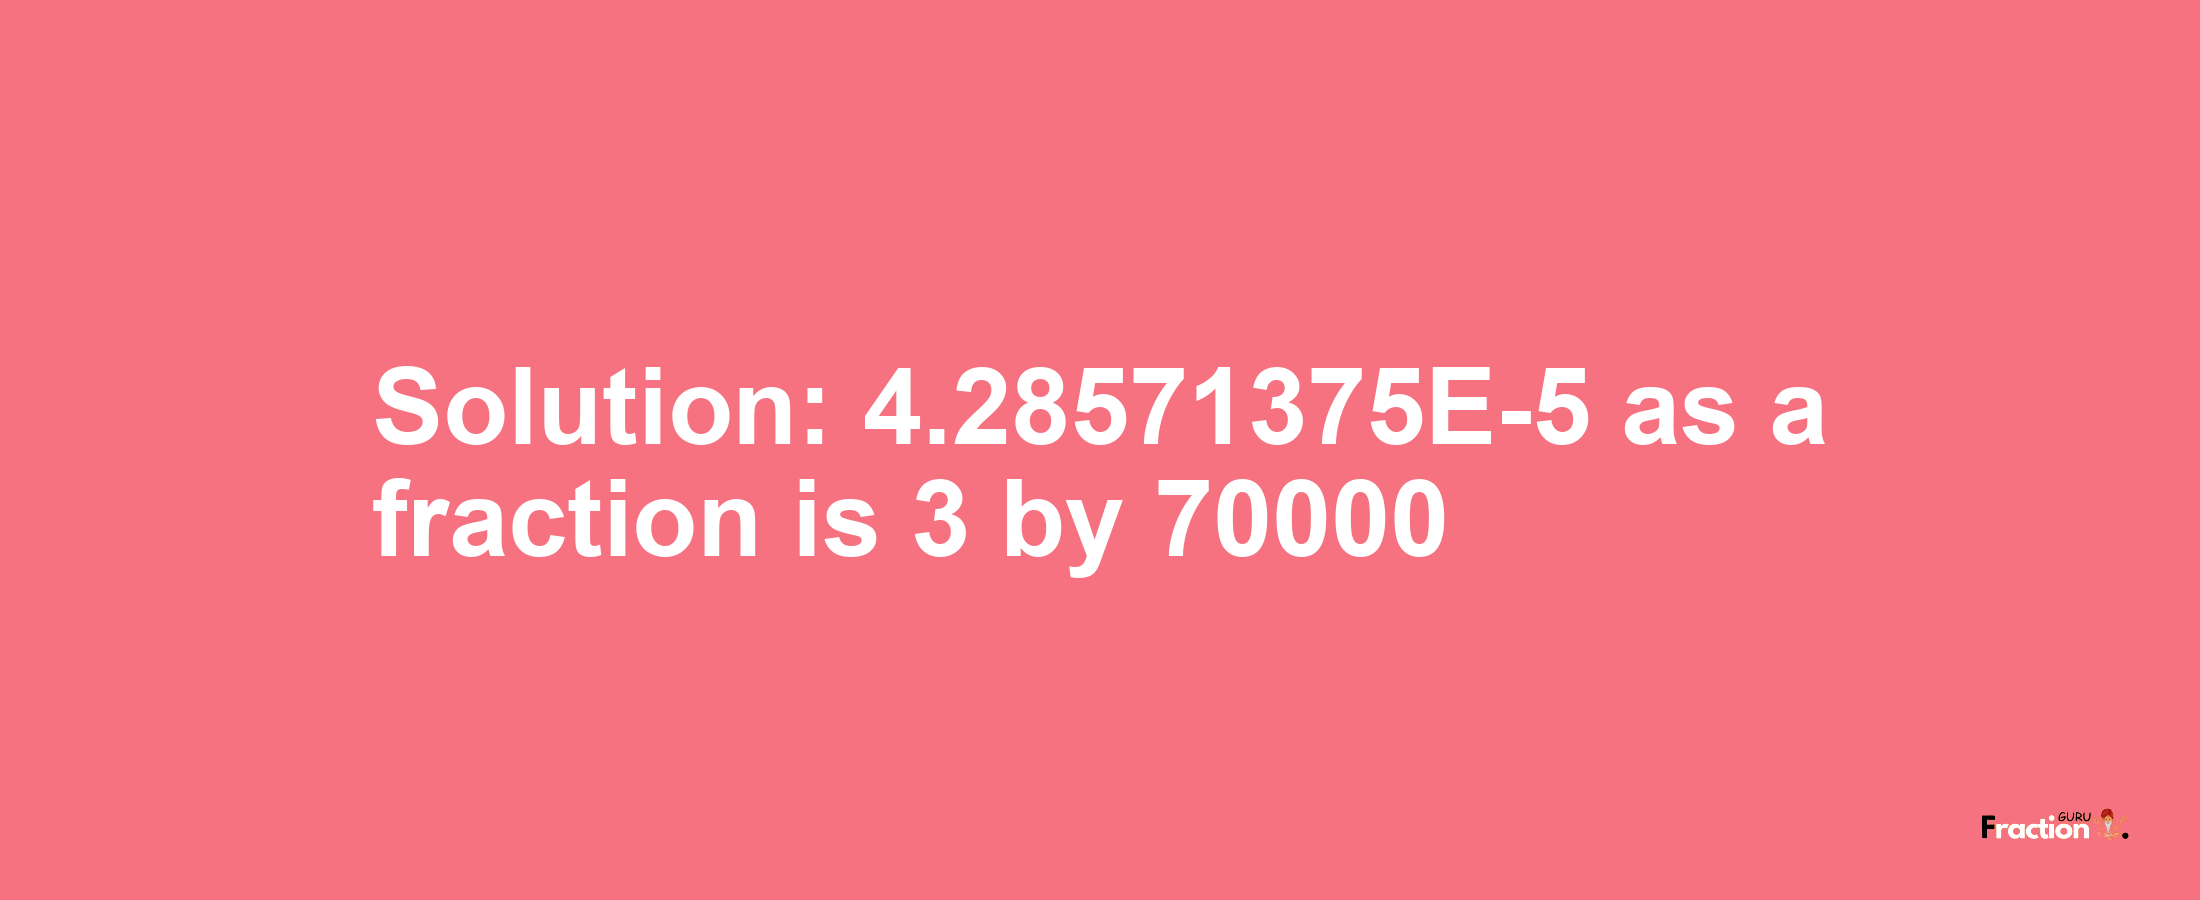 Solution:4.28571375E-5 as a fraction is 3/70000